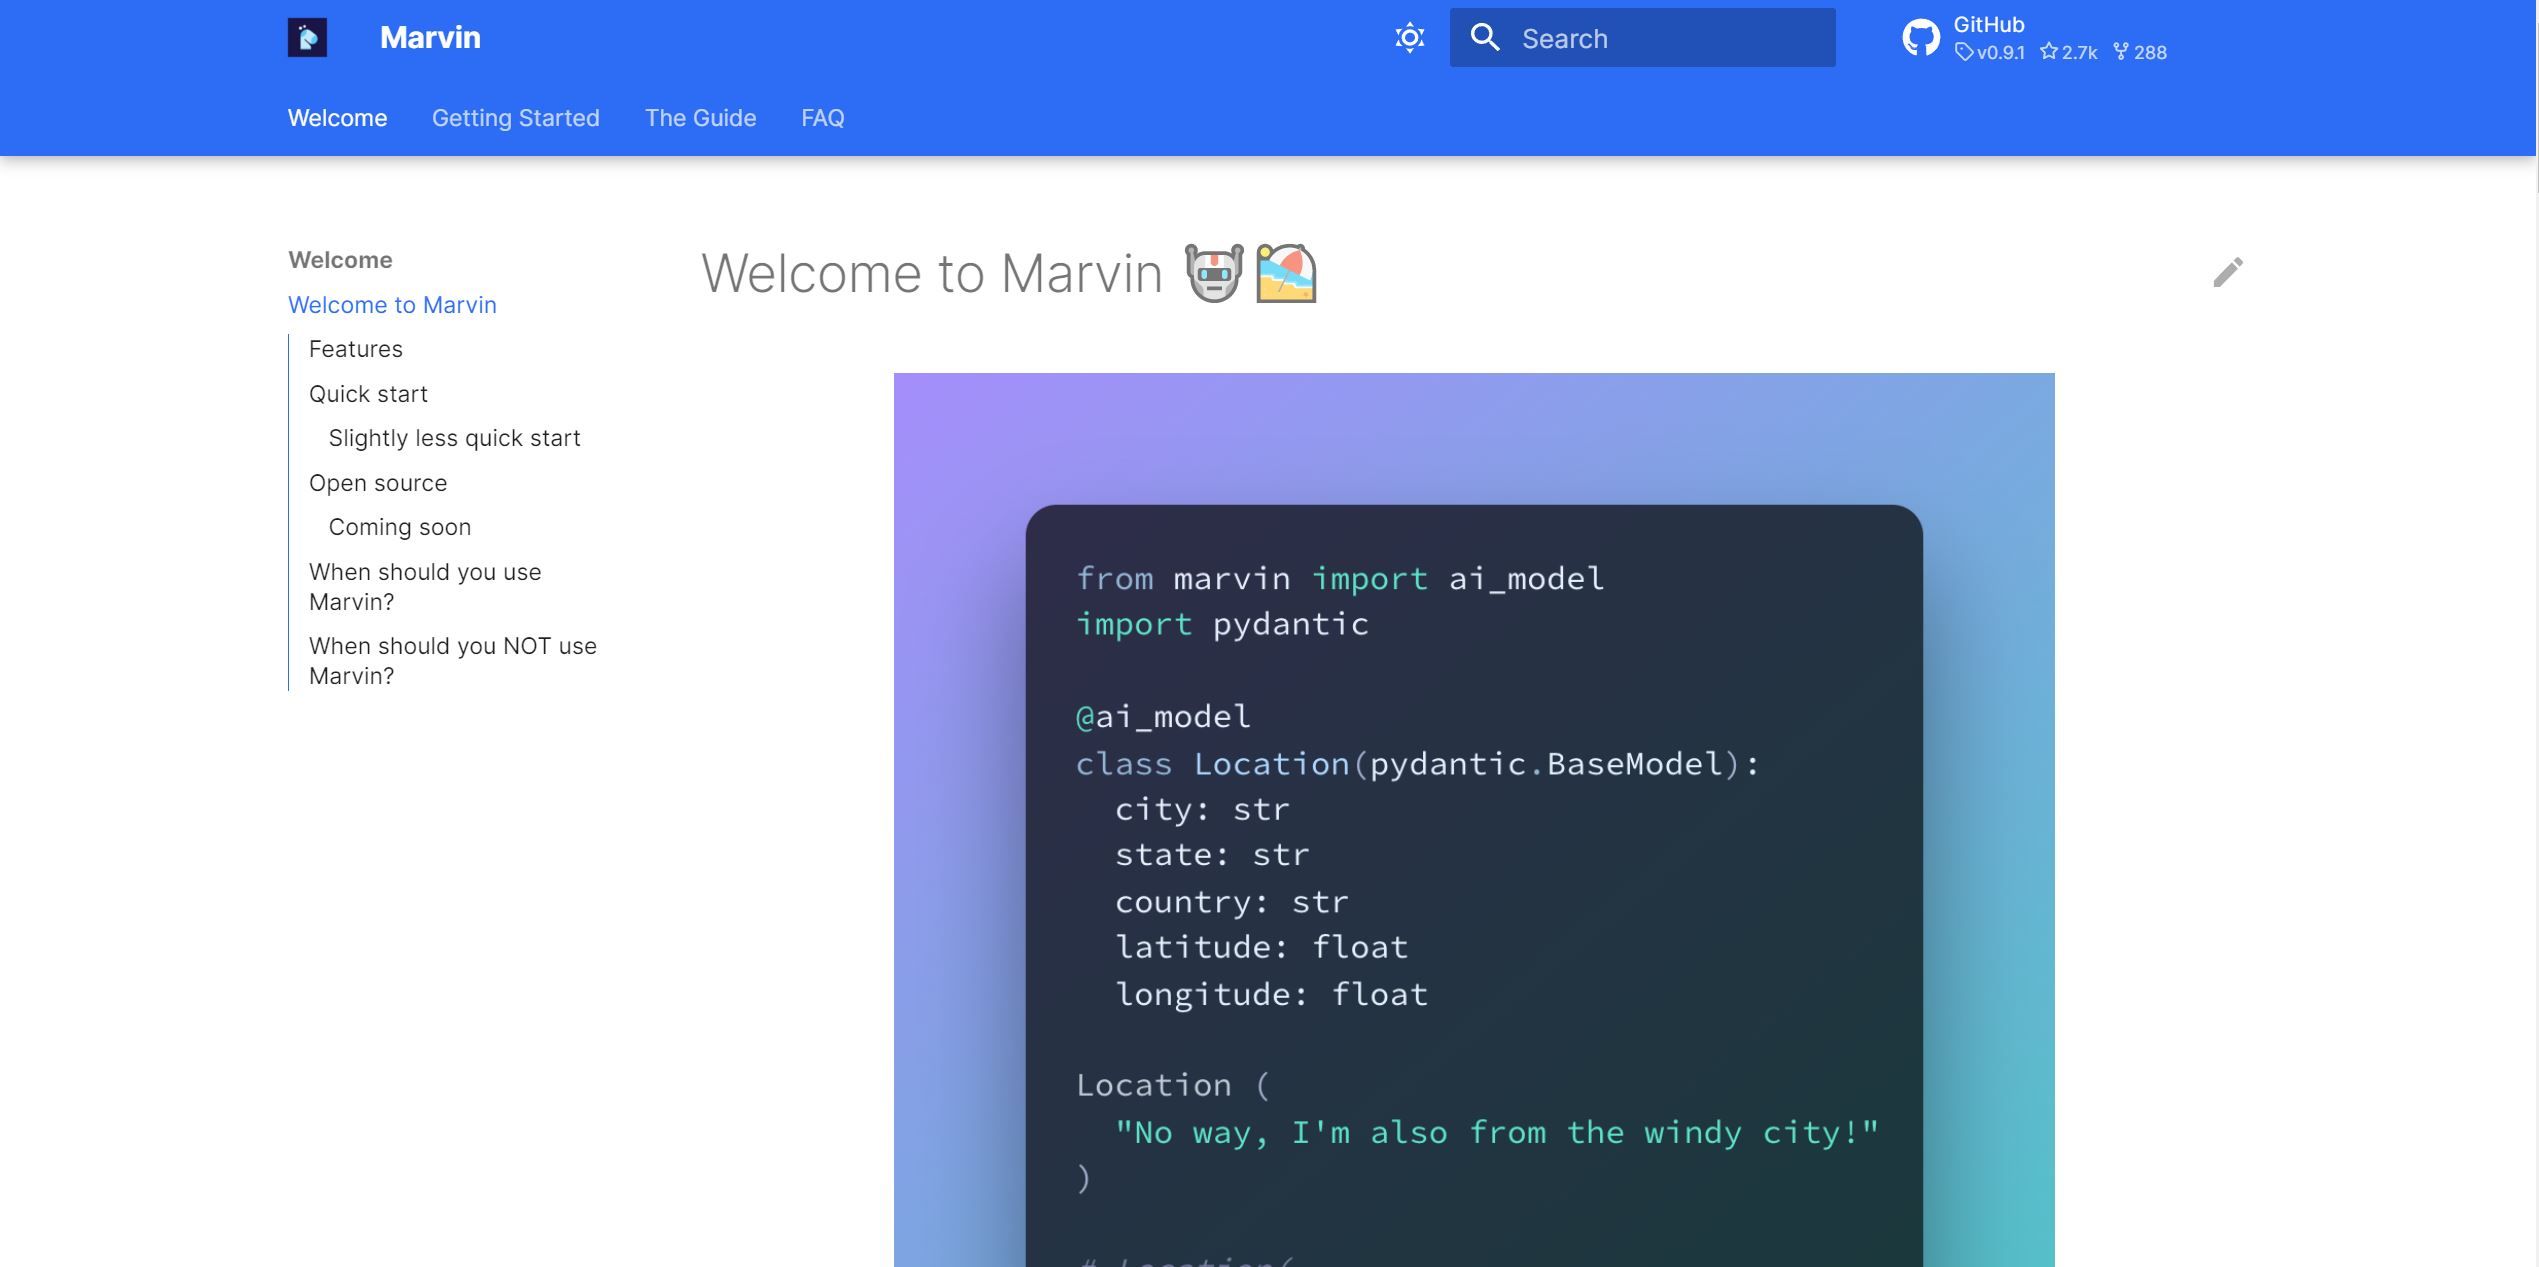 Post: Marvin